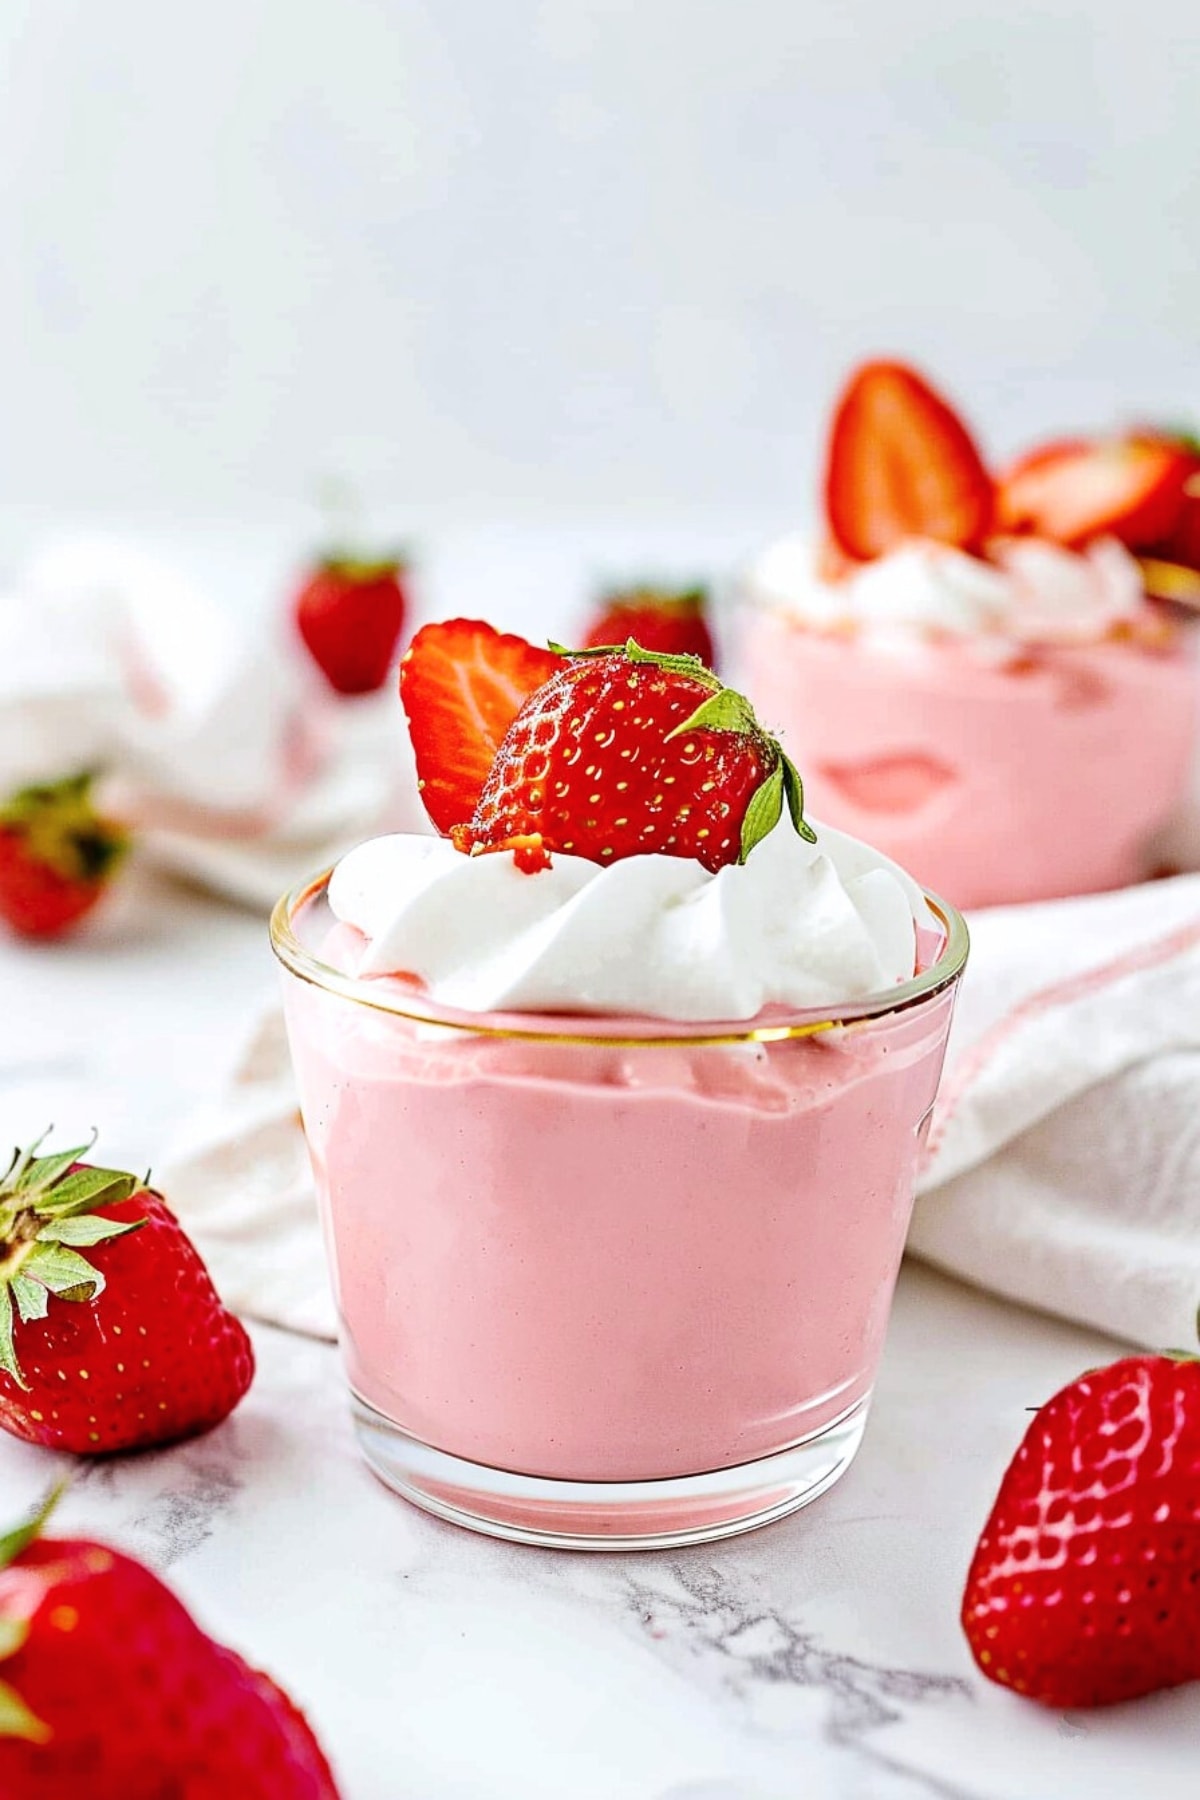 Sweet and refreshing homemade strawberry mousse with whipped cream